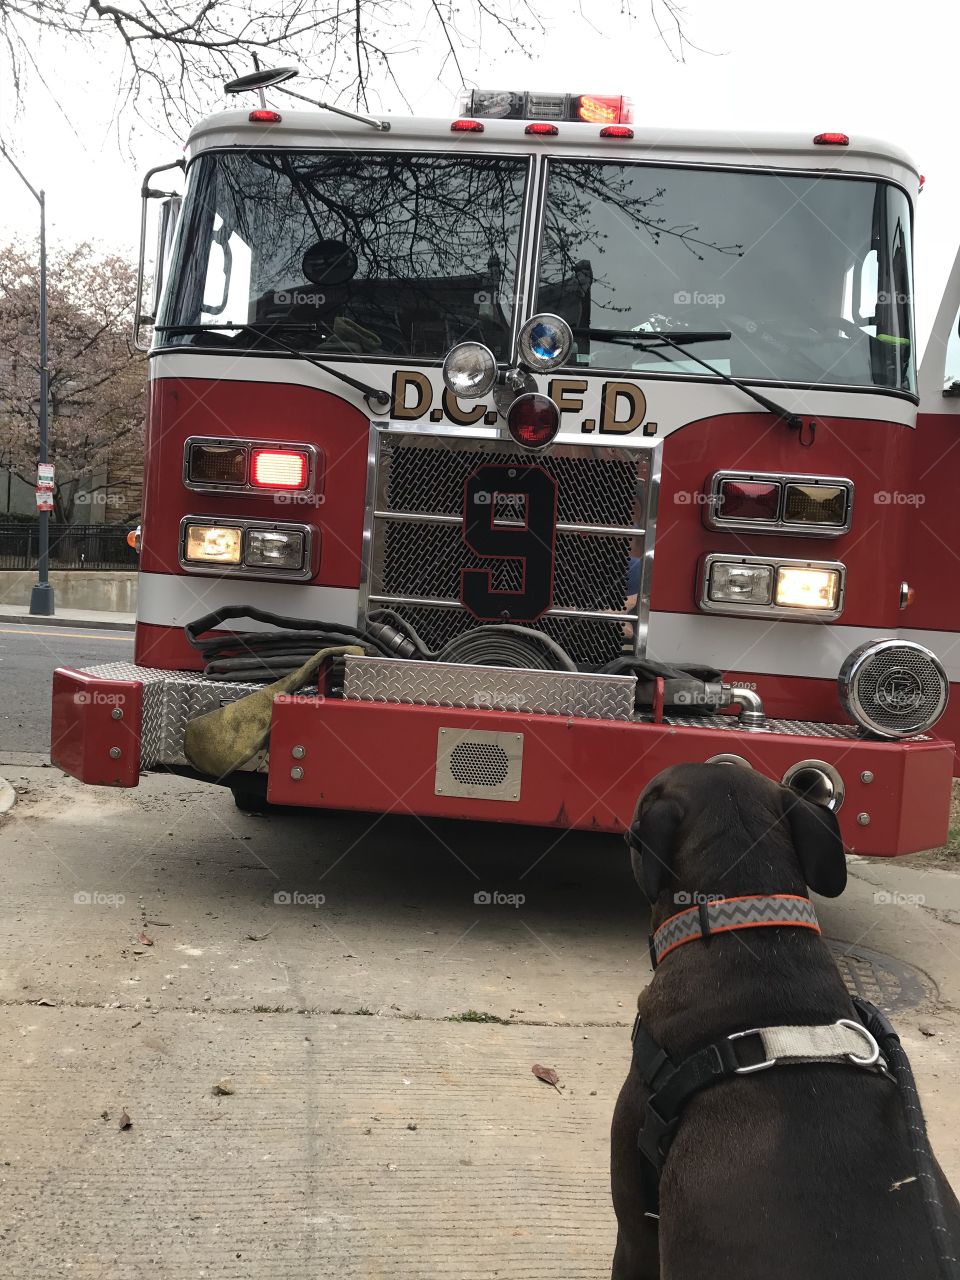 Hedley Stares Down Fire Engine